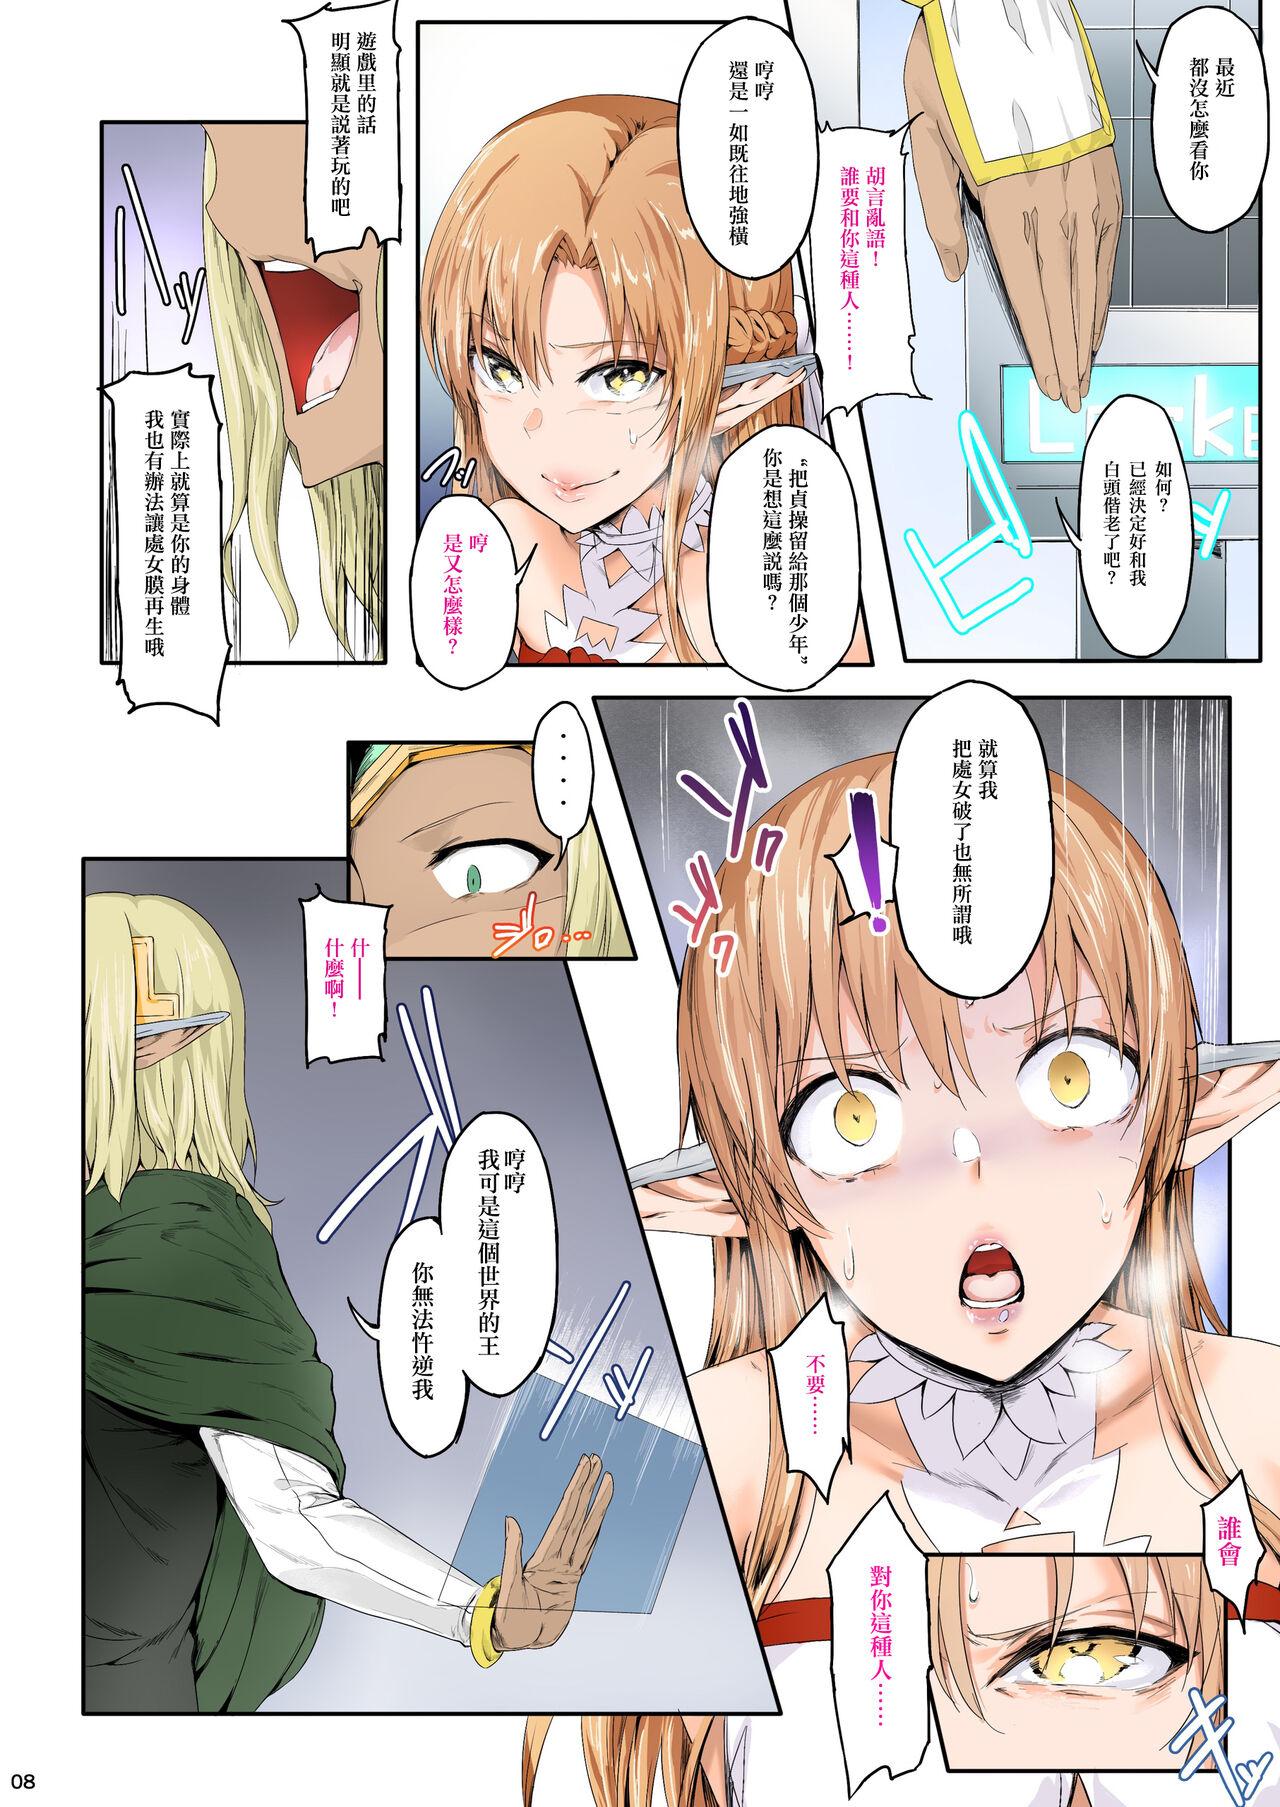 Dominate Asunama - Sword art online Muscle - Page 8